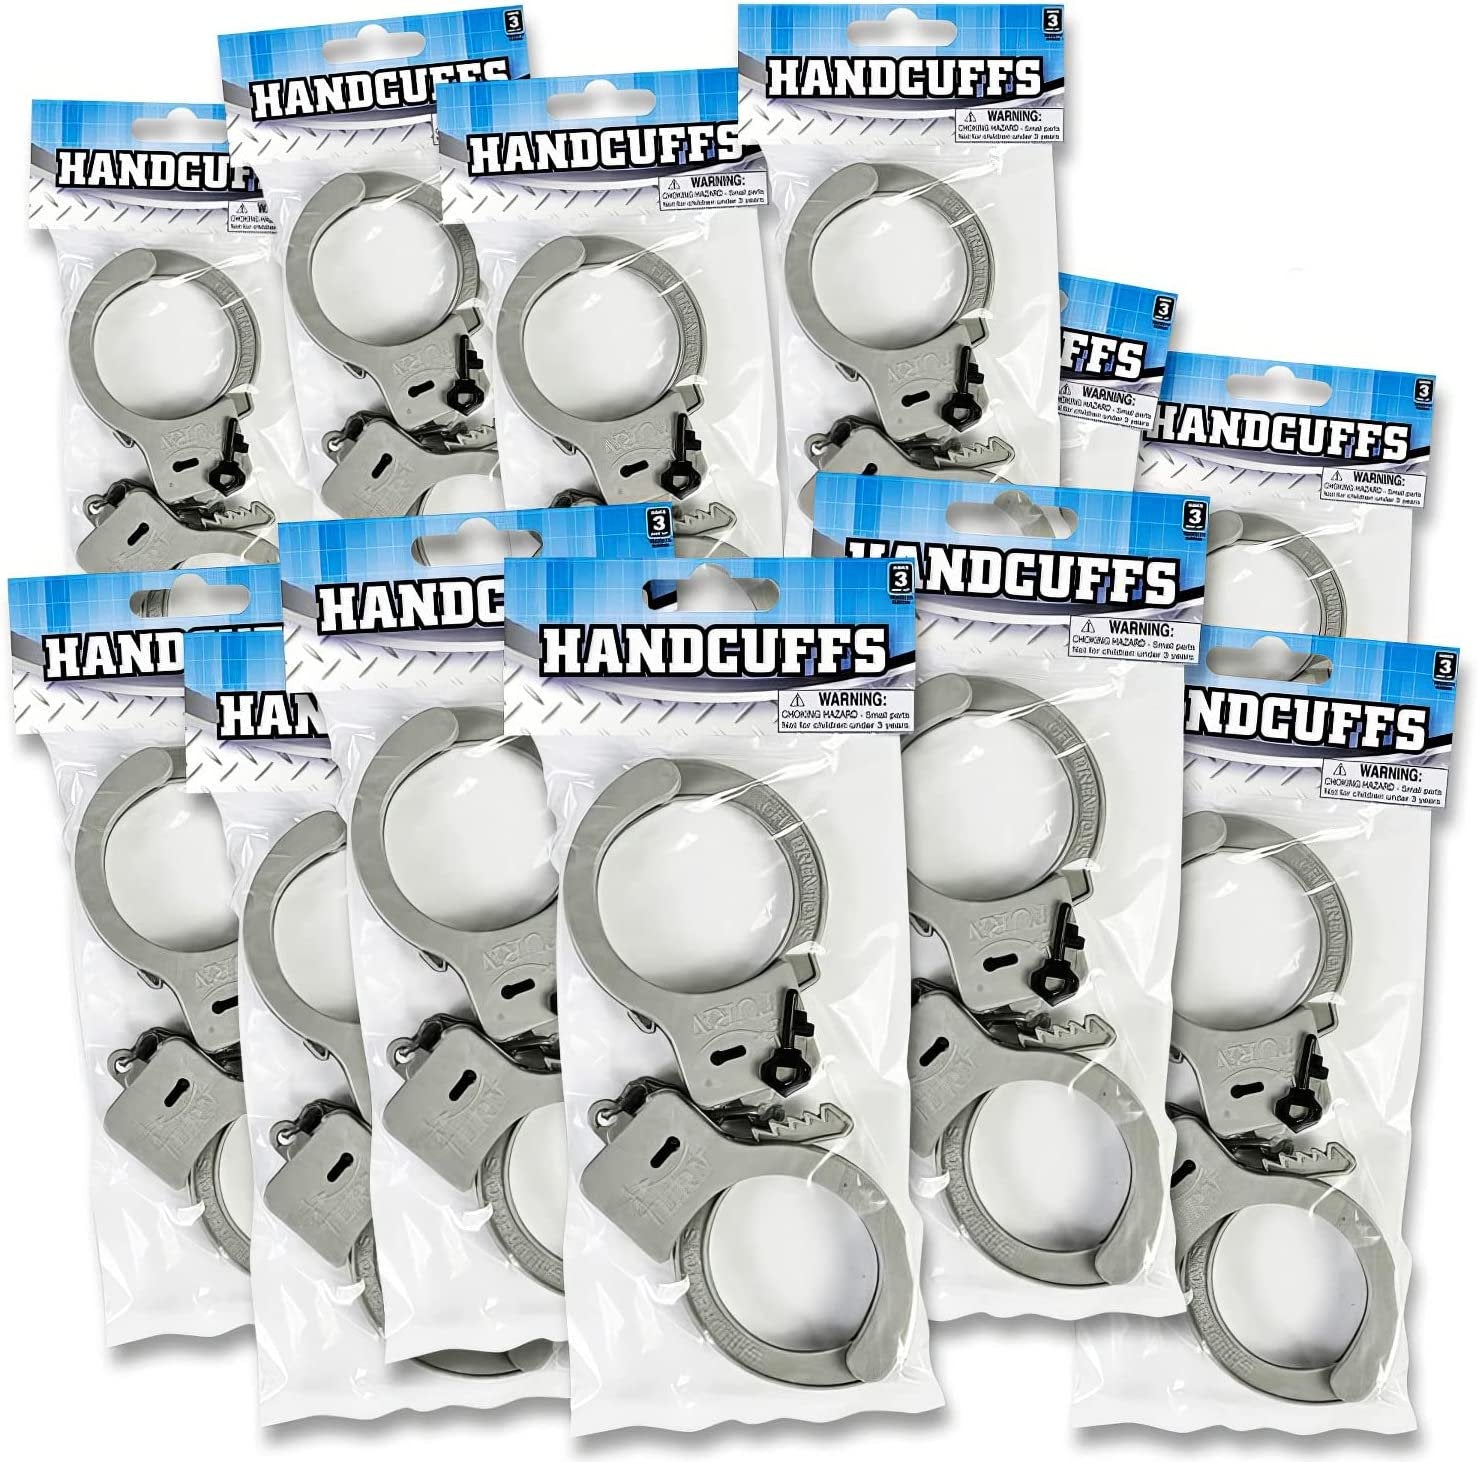 Plastic Toy Handcuffs Set - Pack of 12 - Includes One Key per Pack - Fun Party Favor, Stage or Costume Prop, Goody Bag Filler, Gift for Boys and Girls